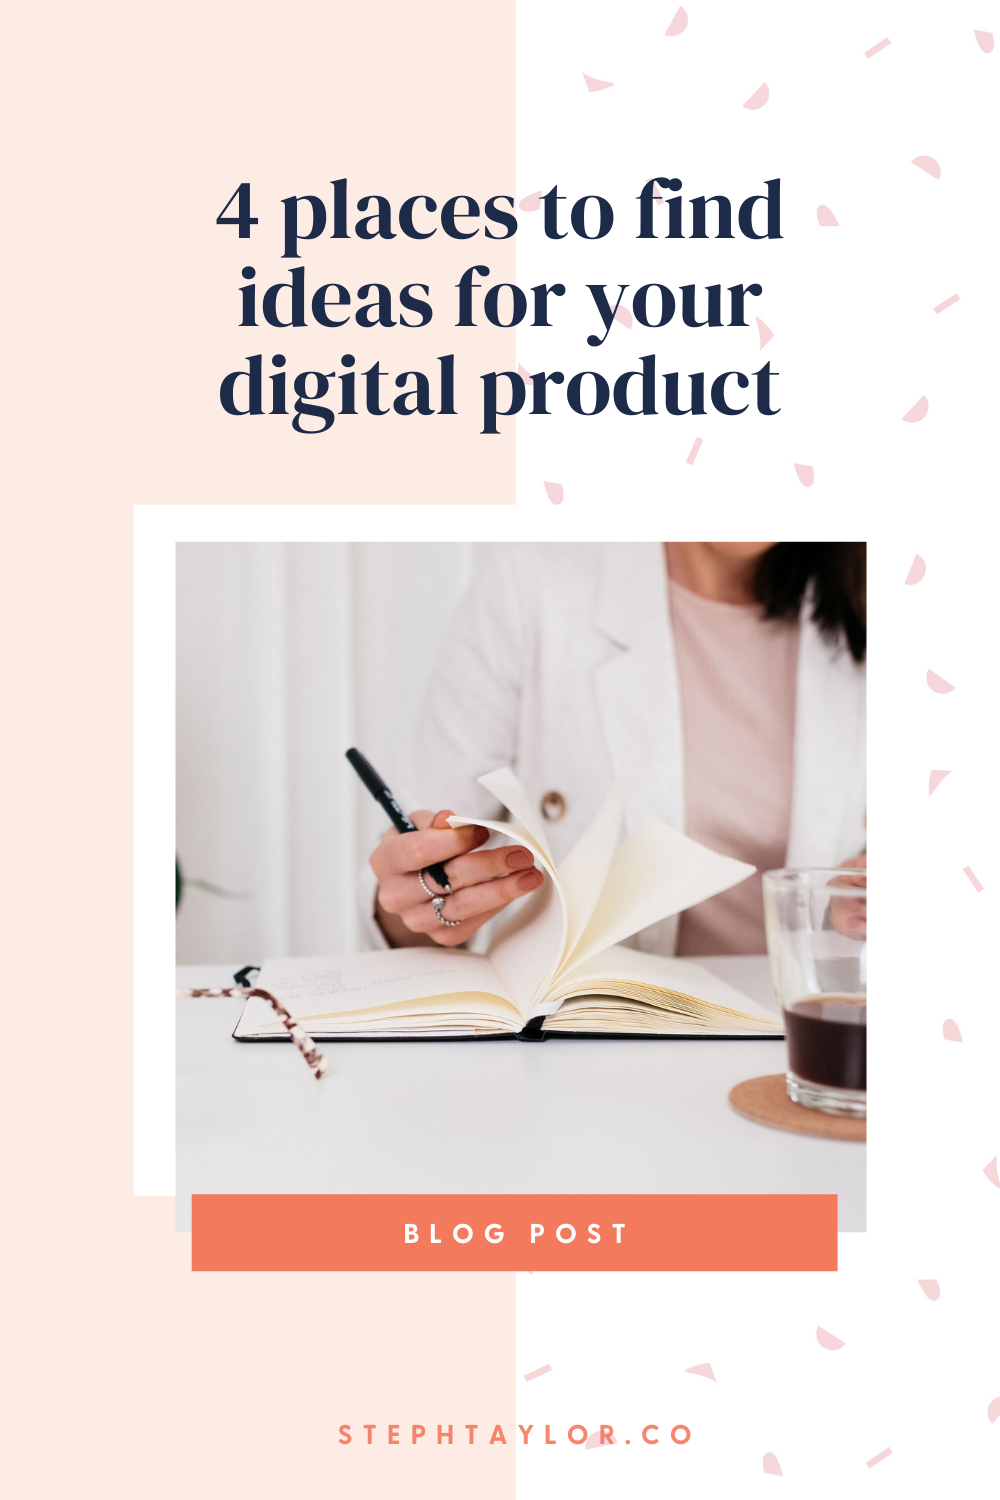 4 places to find ideas for your digital product